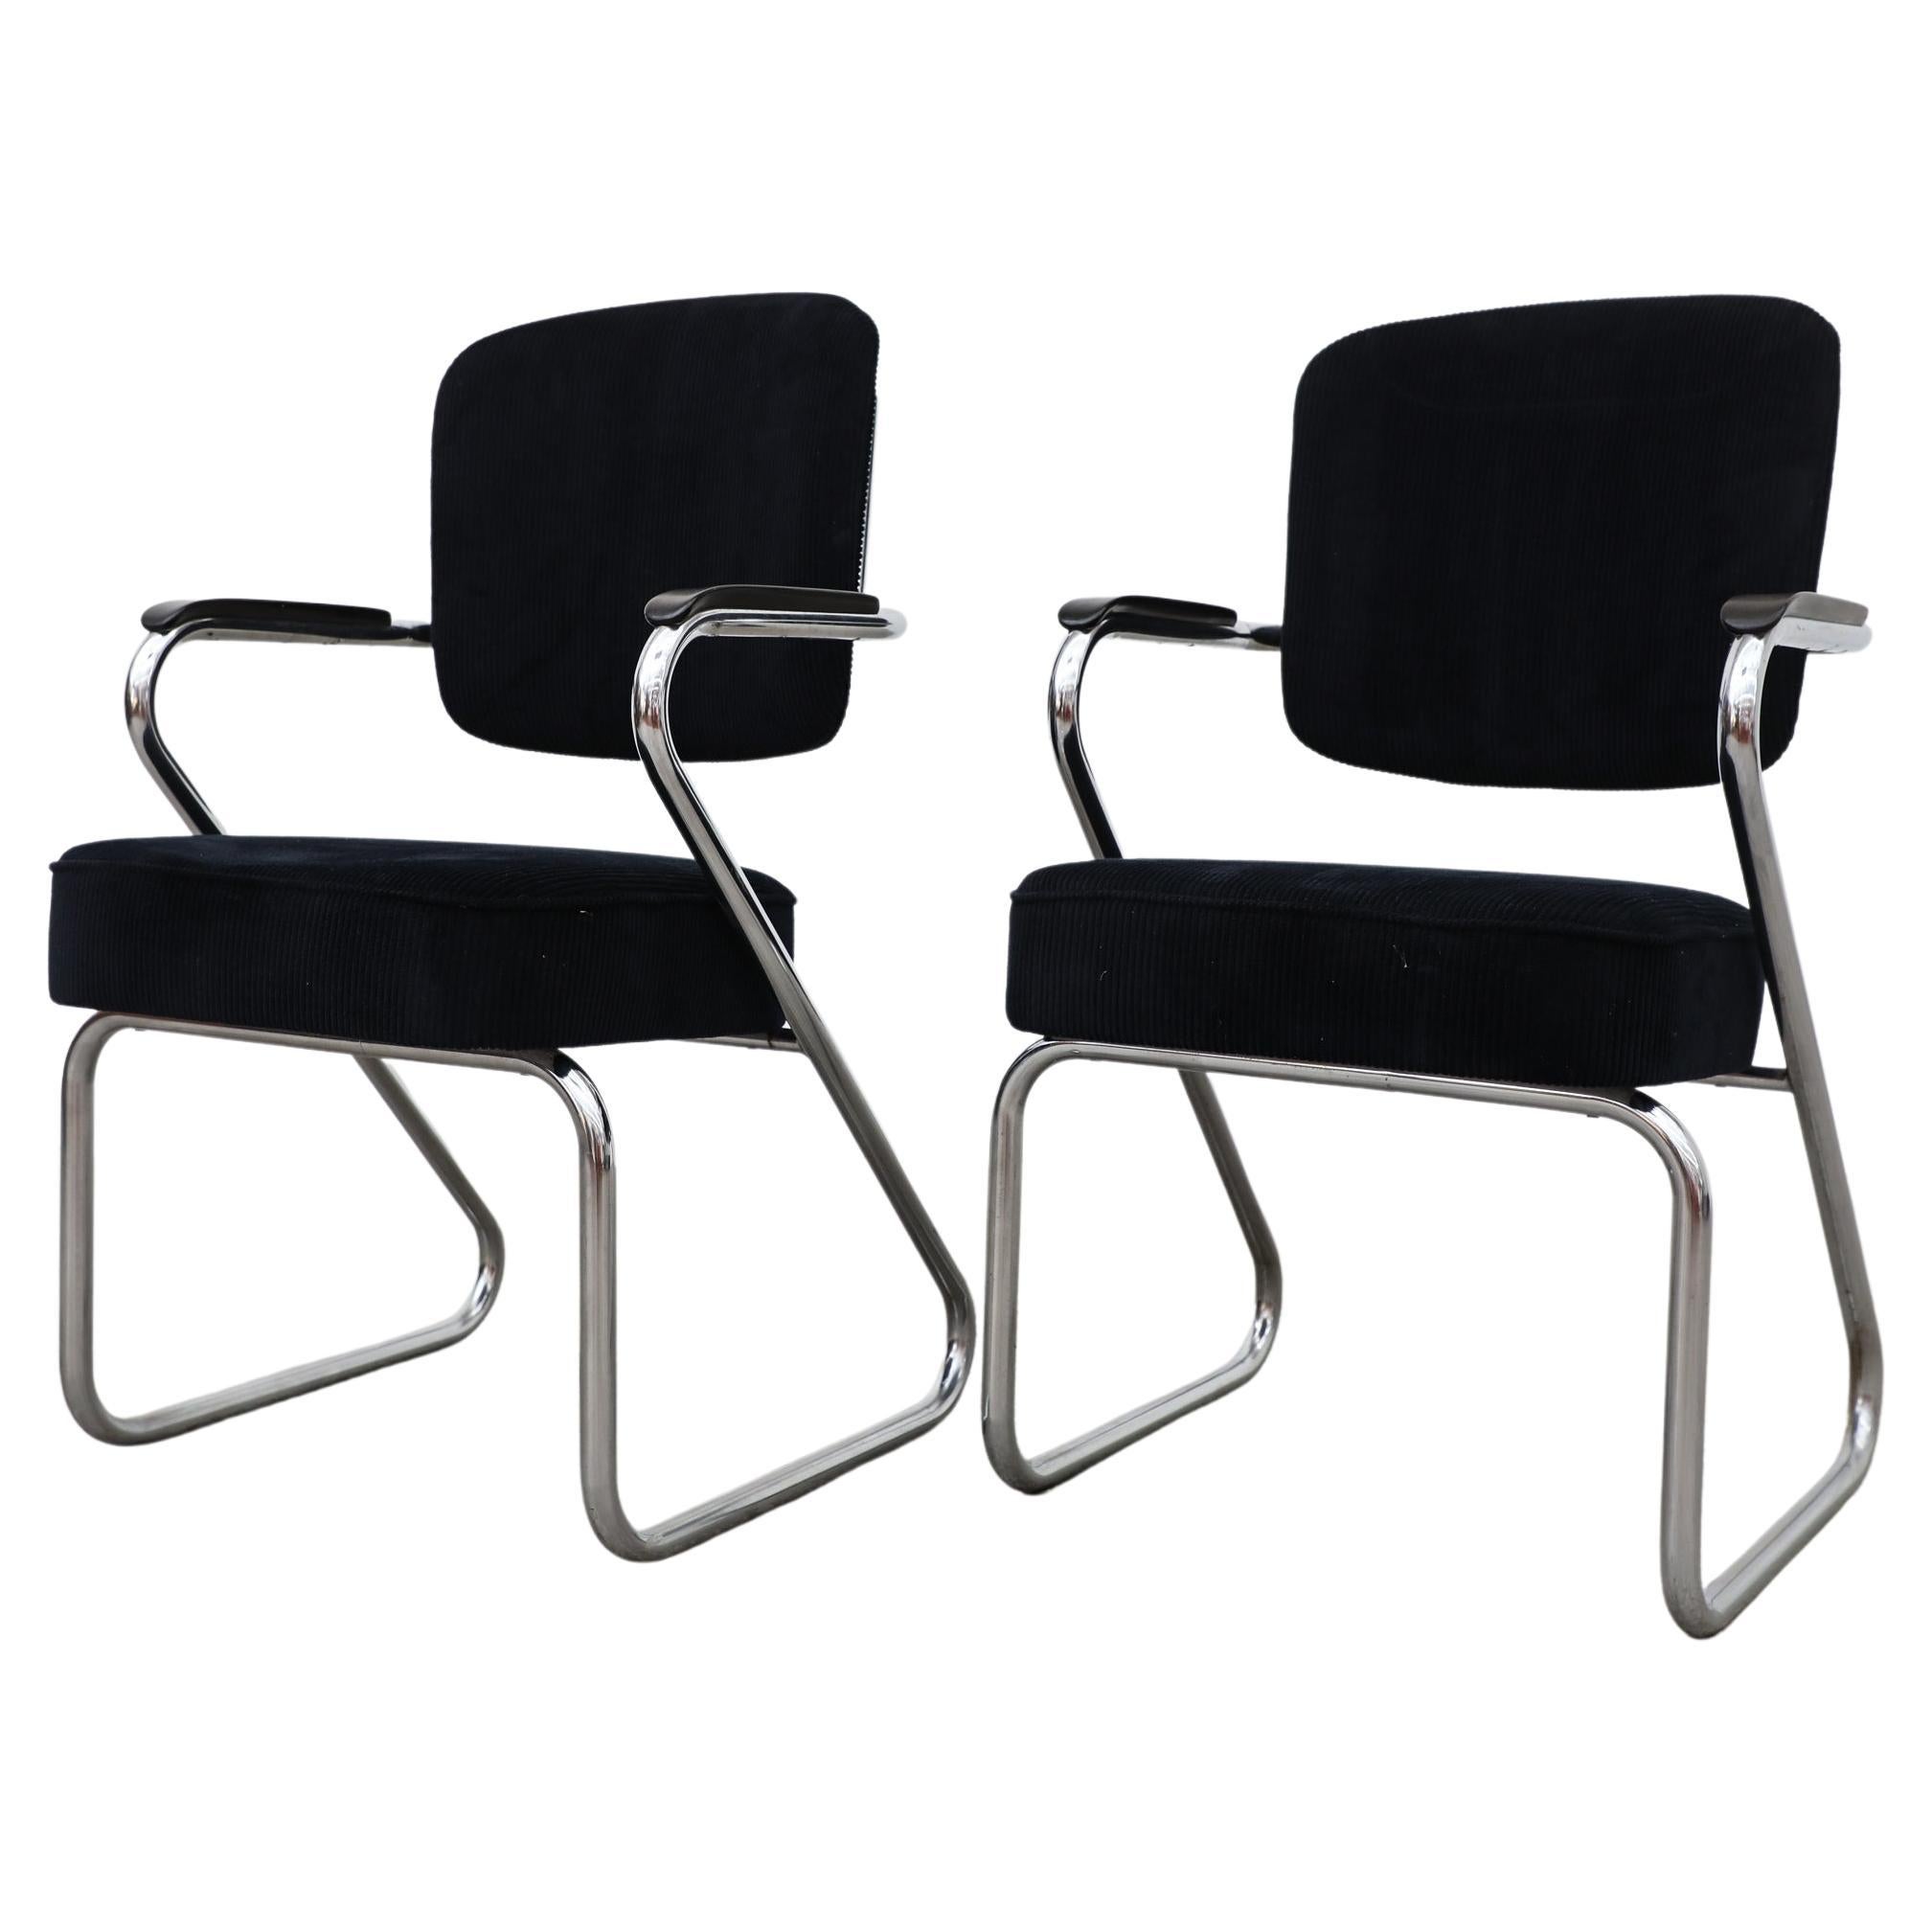 Corduroy Chairs by Paul Schuitema for Fana Metaal Rotterdam, 1950s For Sale